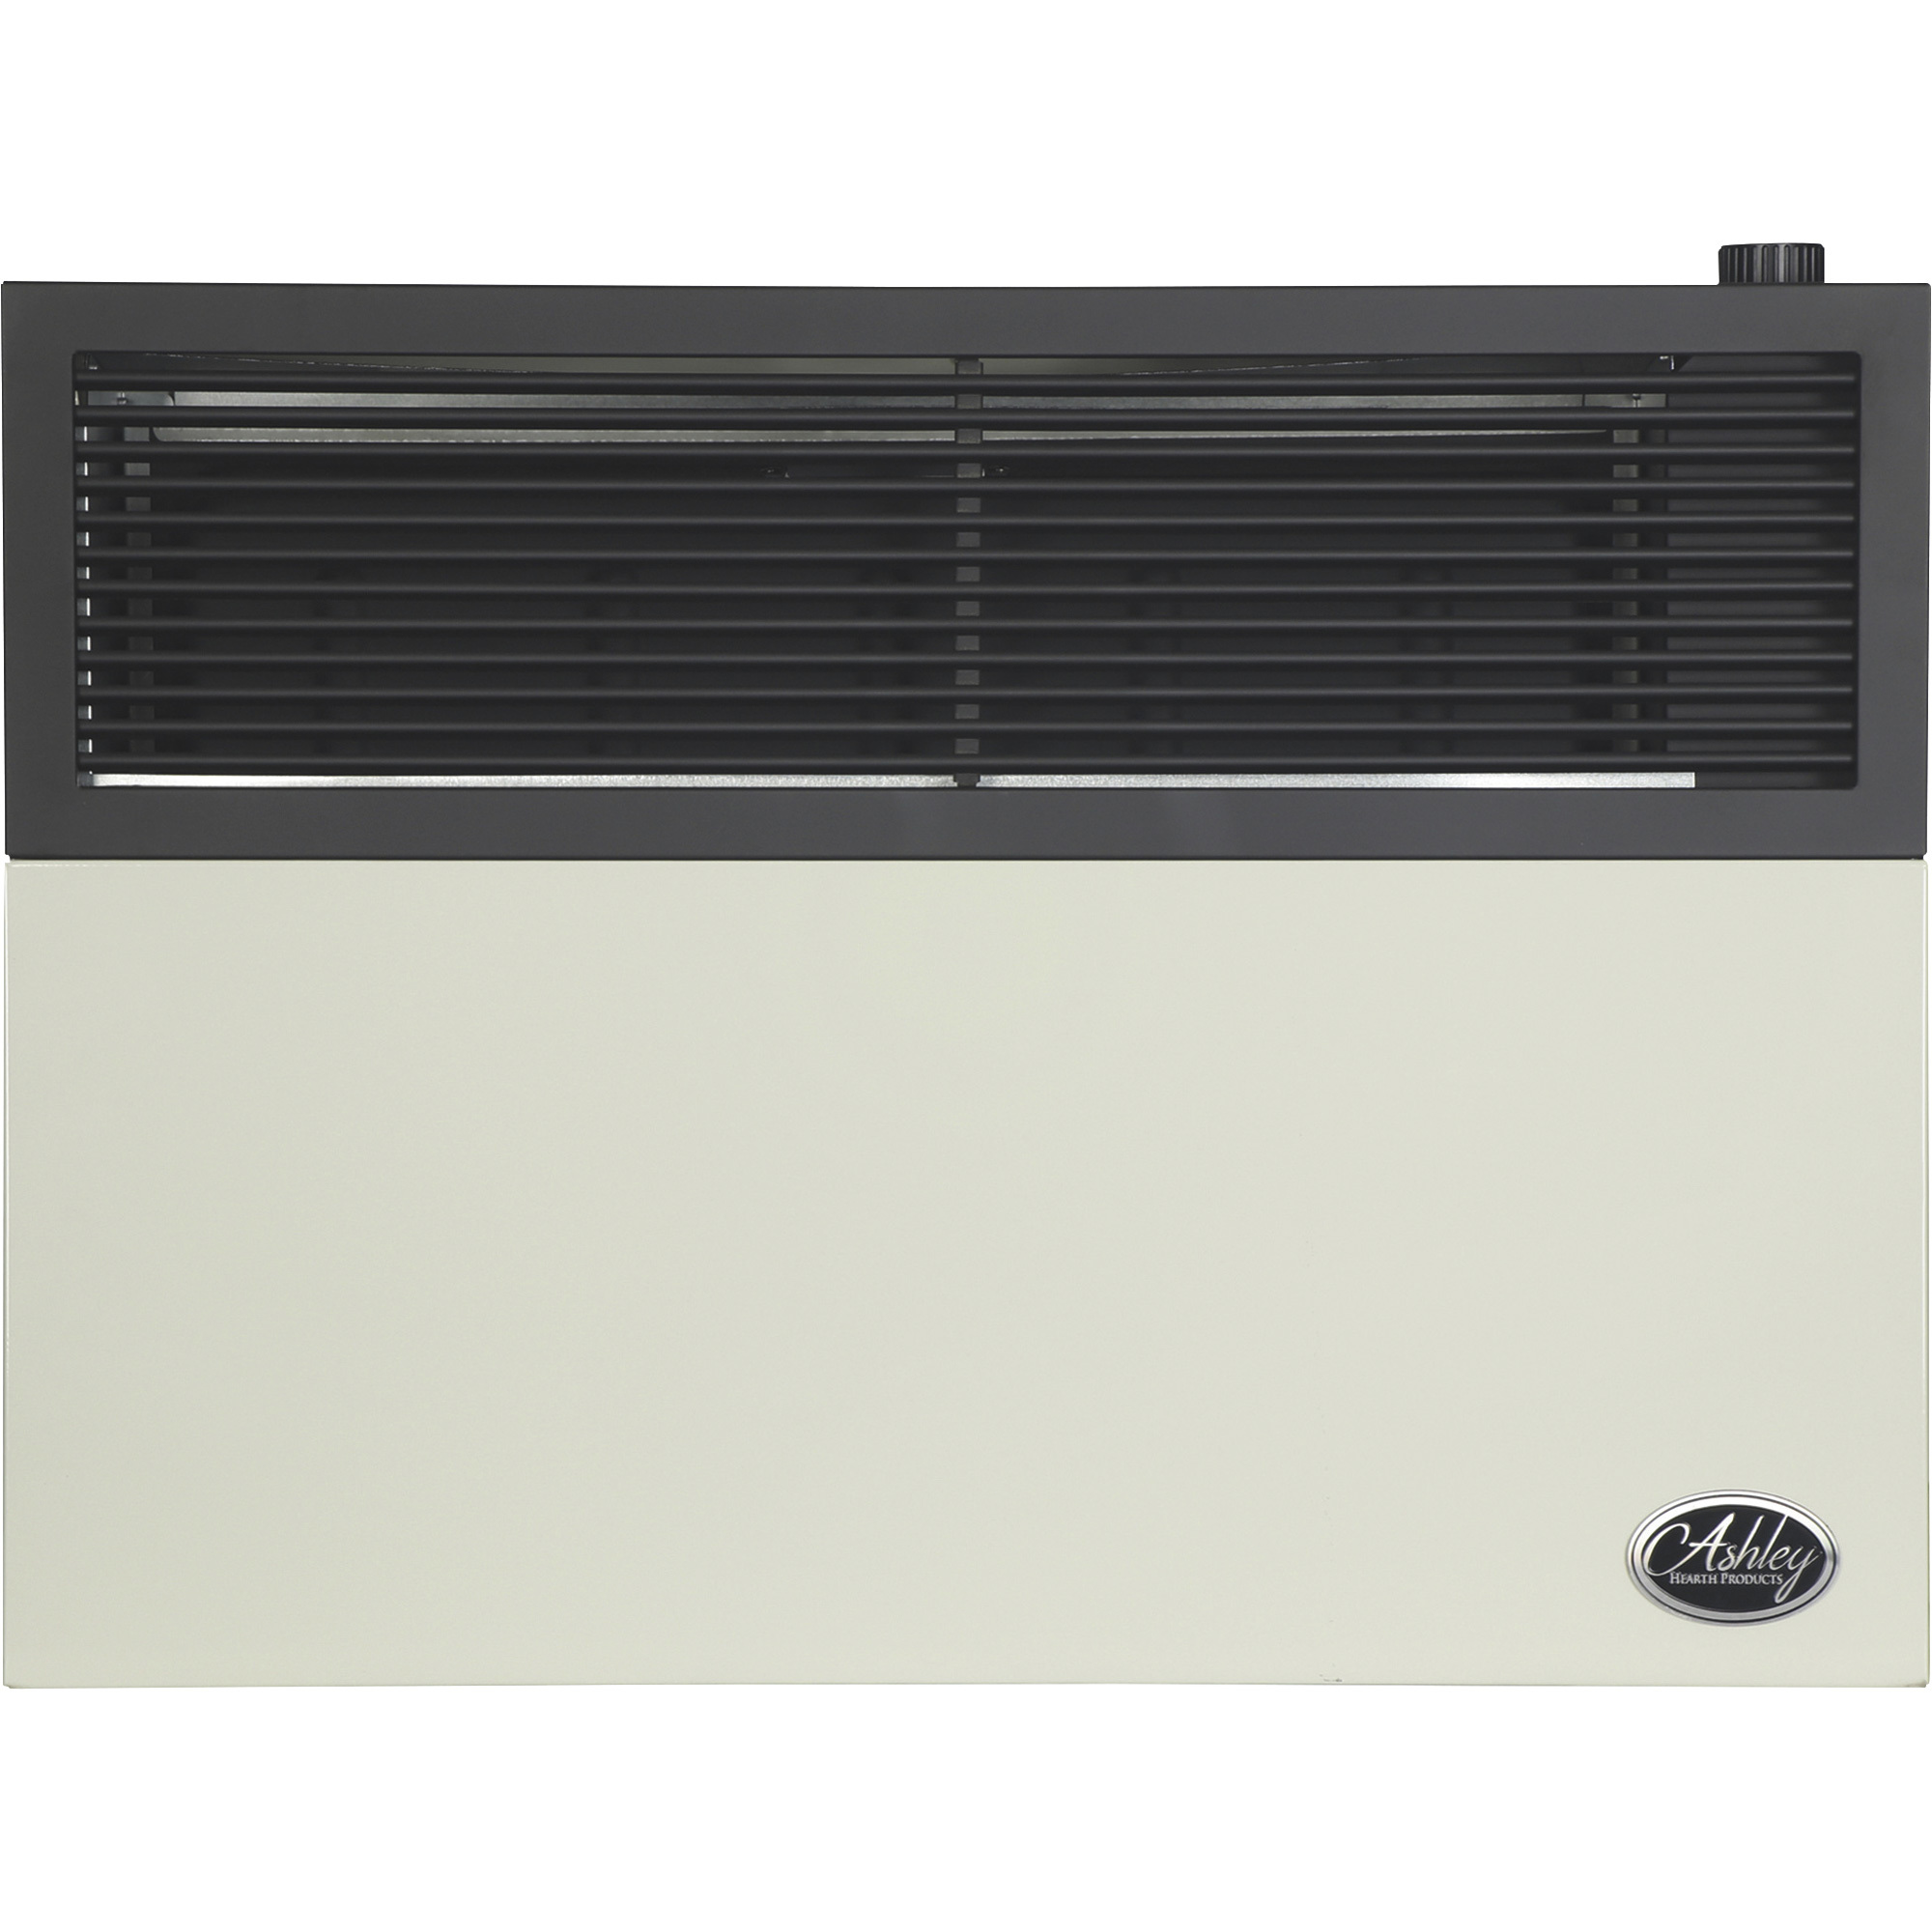 Ashley Hearth Direct Vent LP Wall Heater with Venting â 17,000 BTU, Model DVAG17L